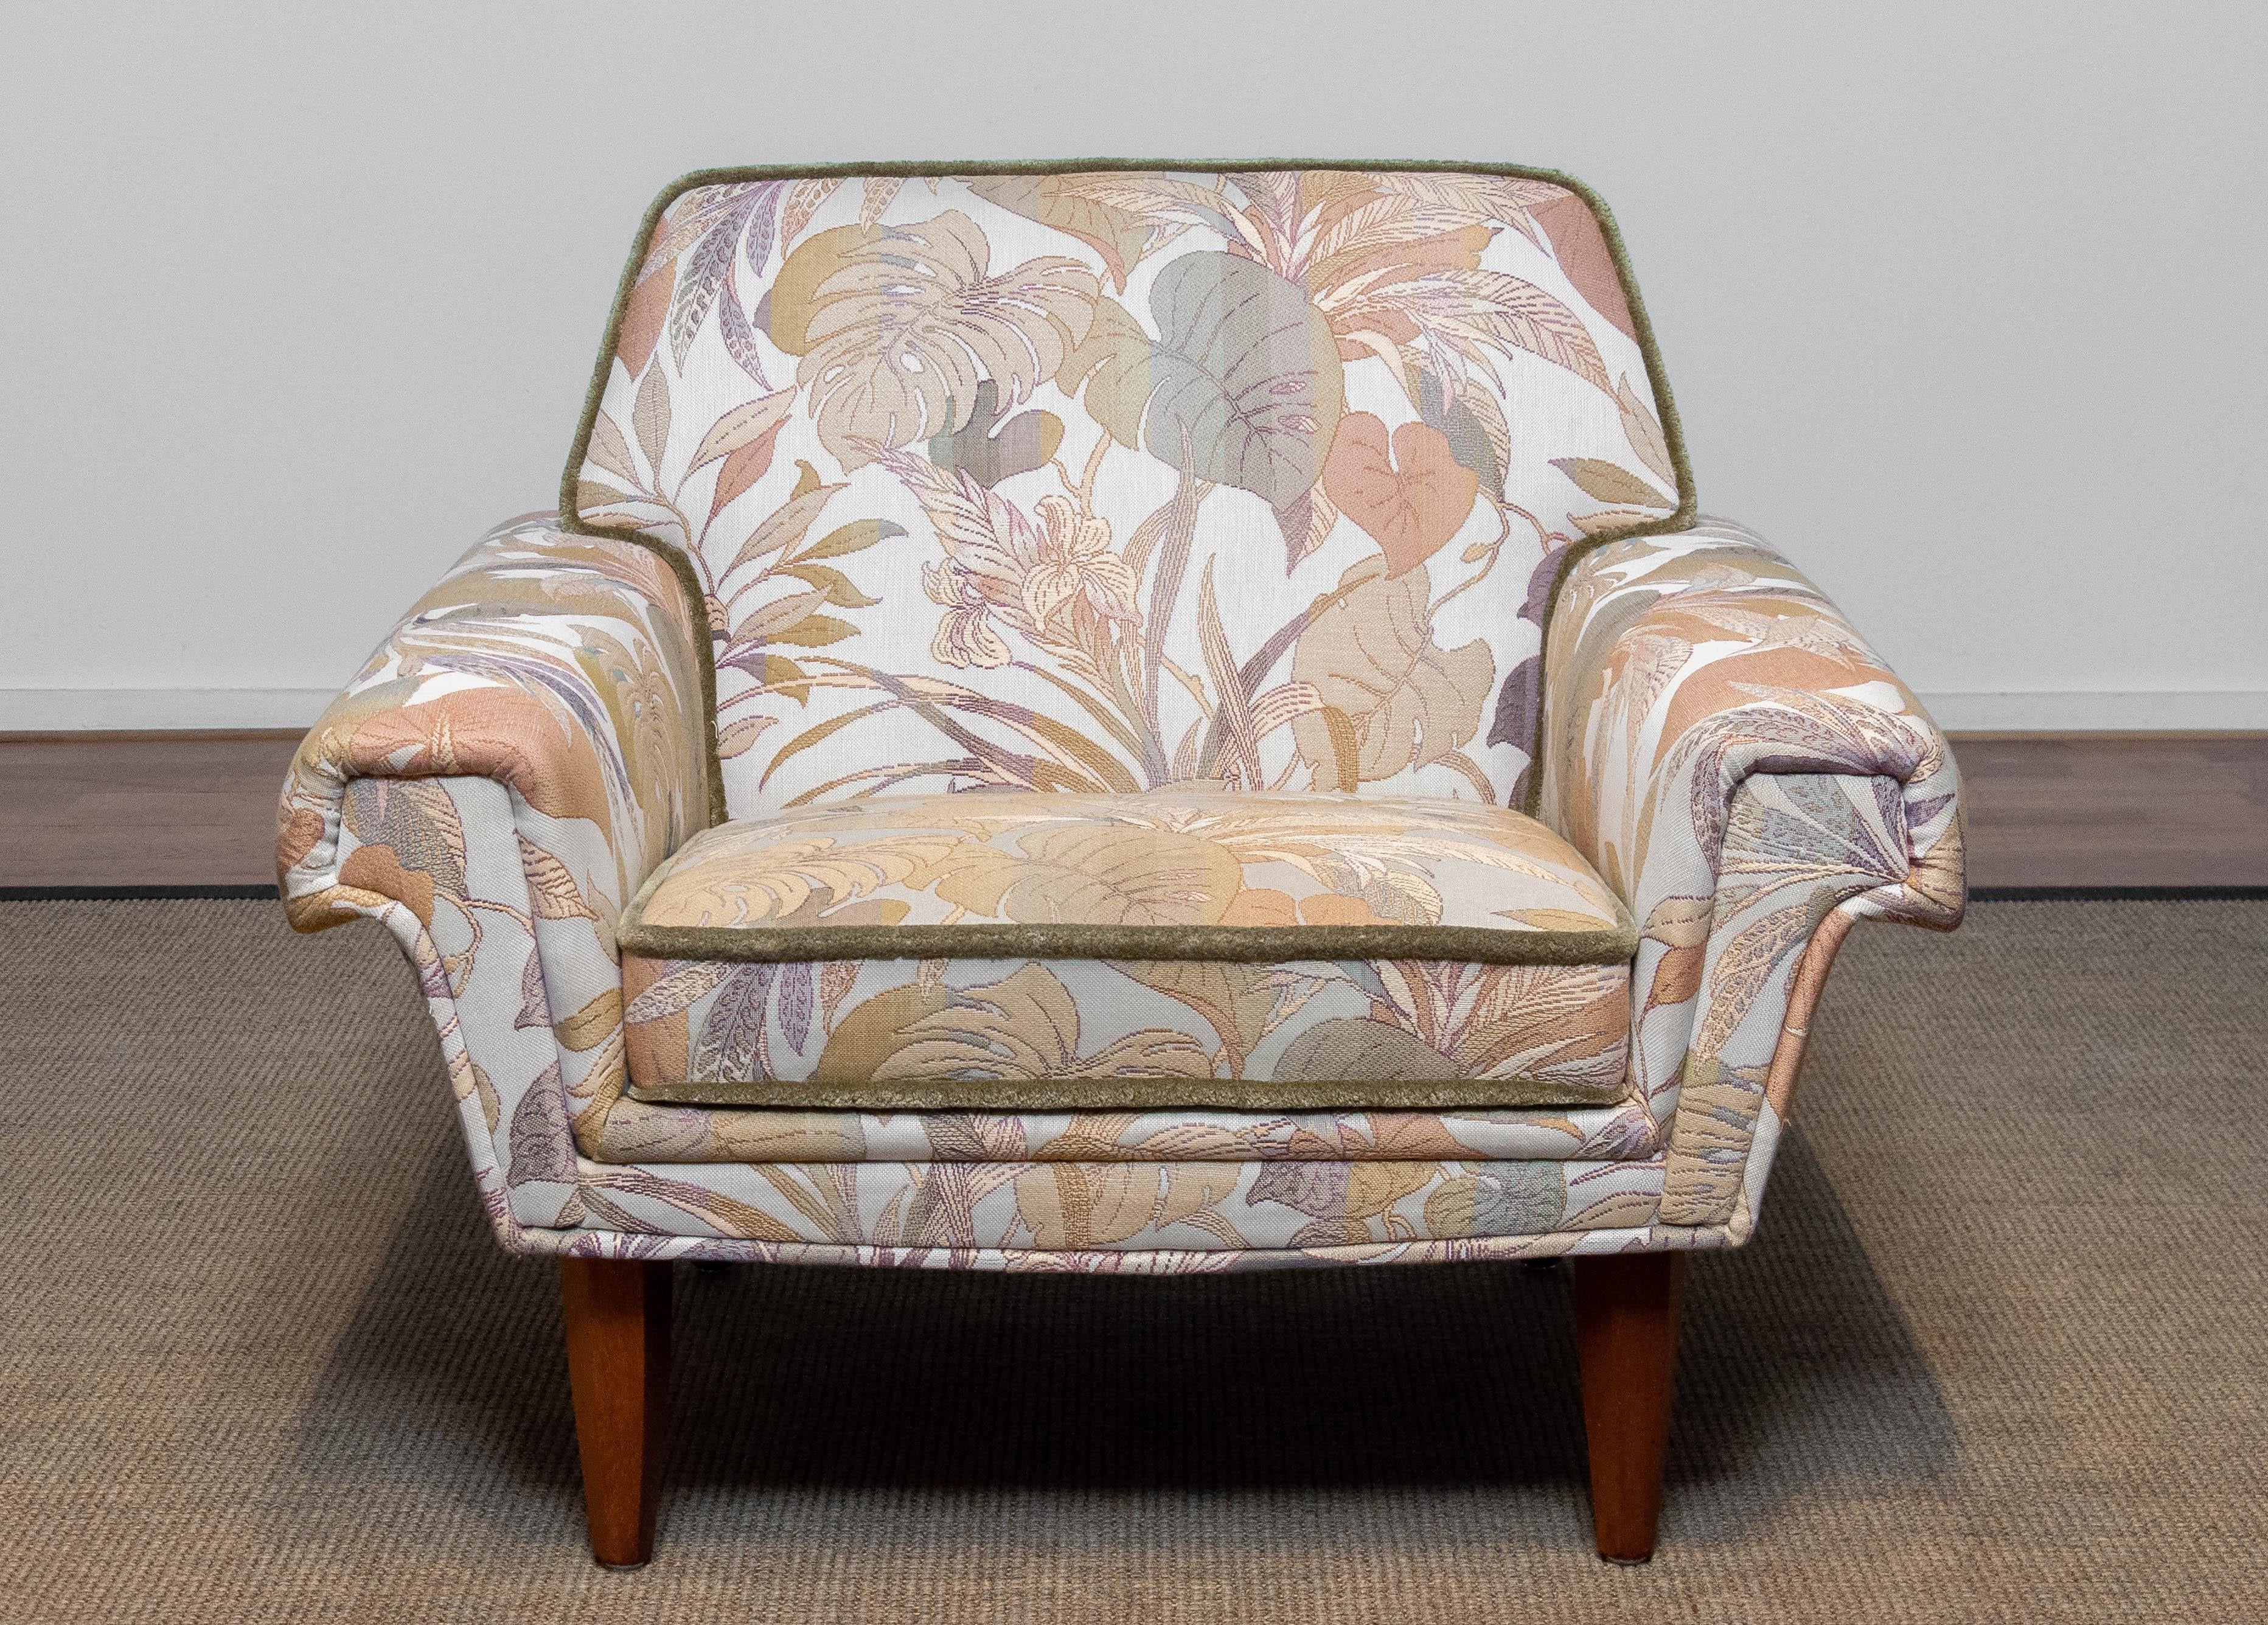 Danish Low Back Lounge Chair Upholstered Floral Jacquard Fabric from the 1970's For Sale 5